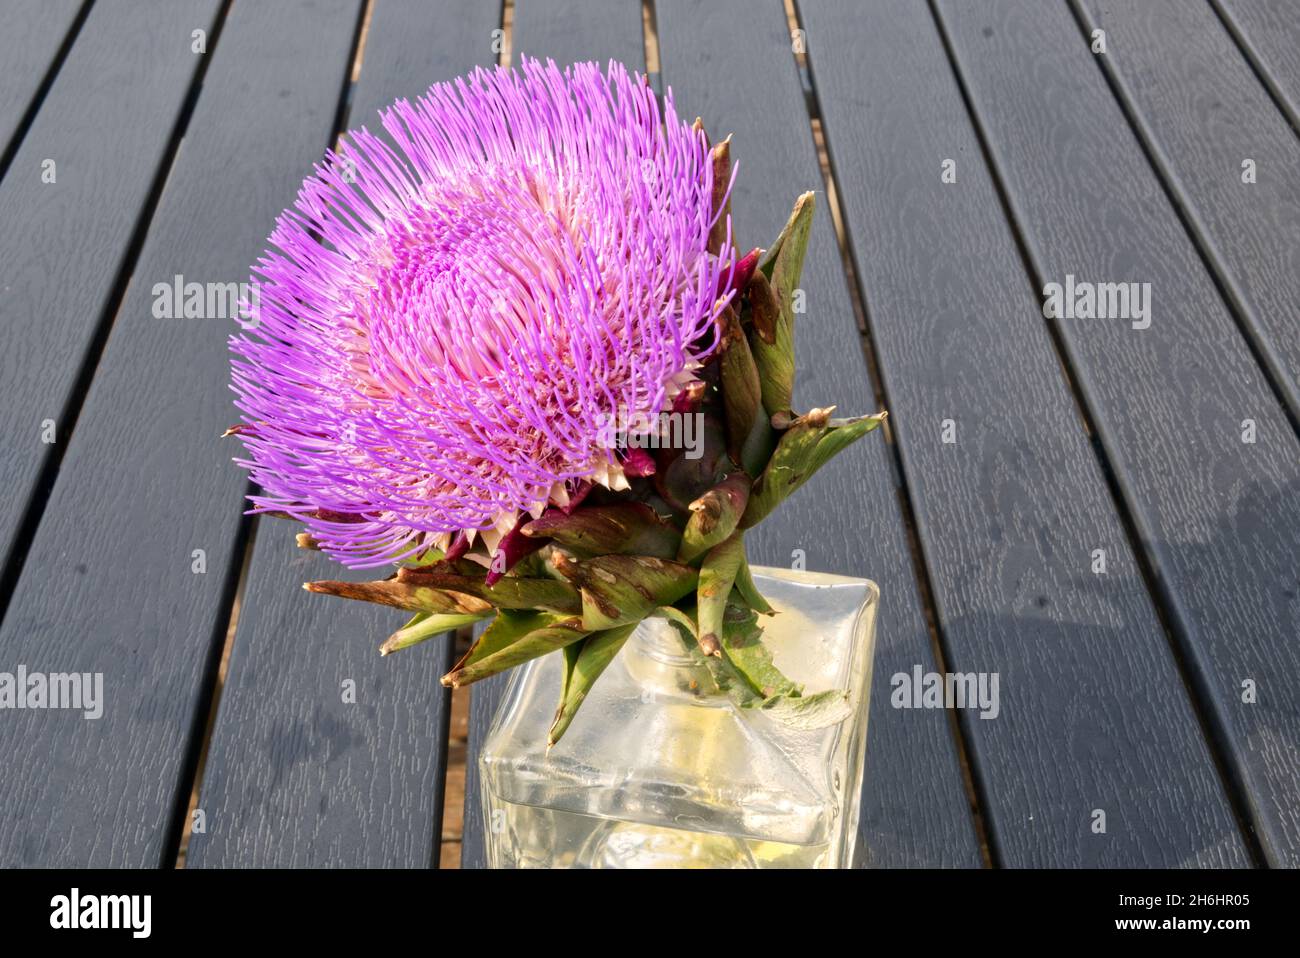 Closeup of Carduus, a genus of flowering plants in the aster family, Asteraceae. Stock Photo